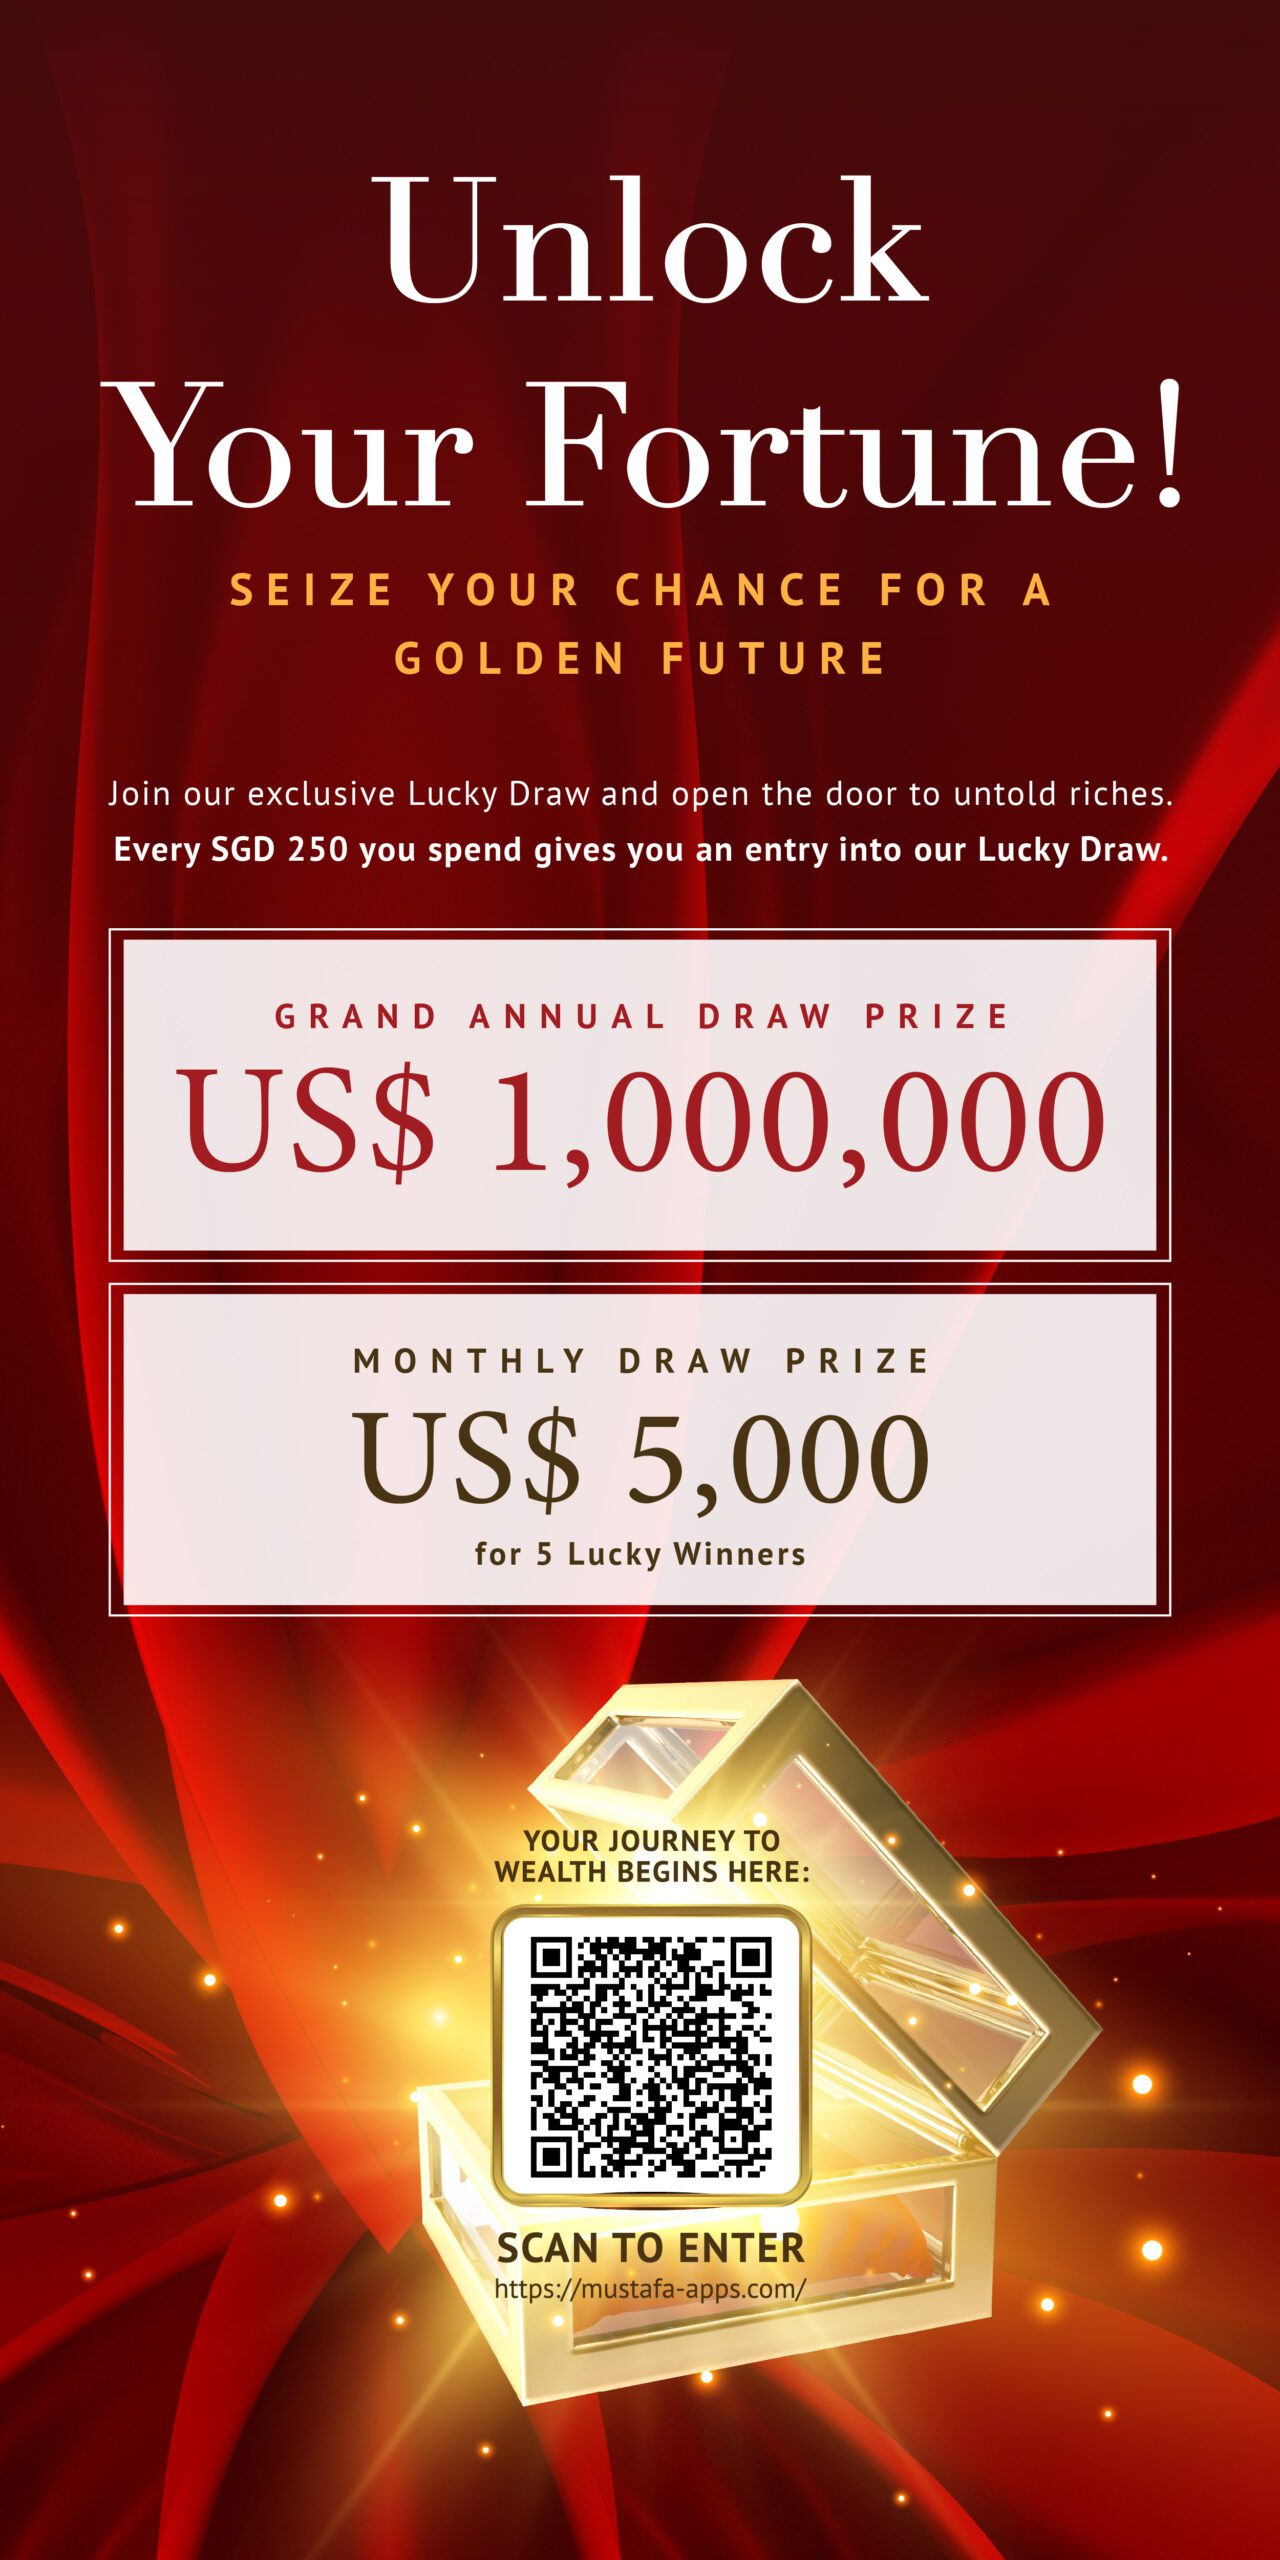 Grand Annual Draw Prize | Monthly Prize Draw | https://mustafajewellery.com/